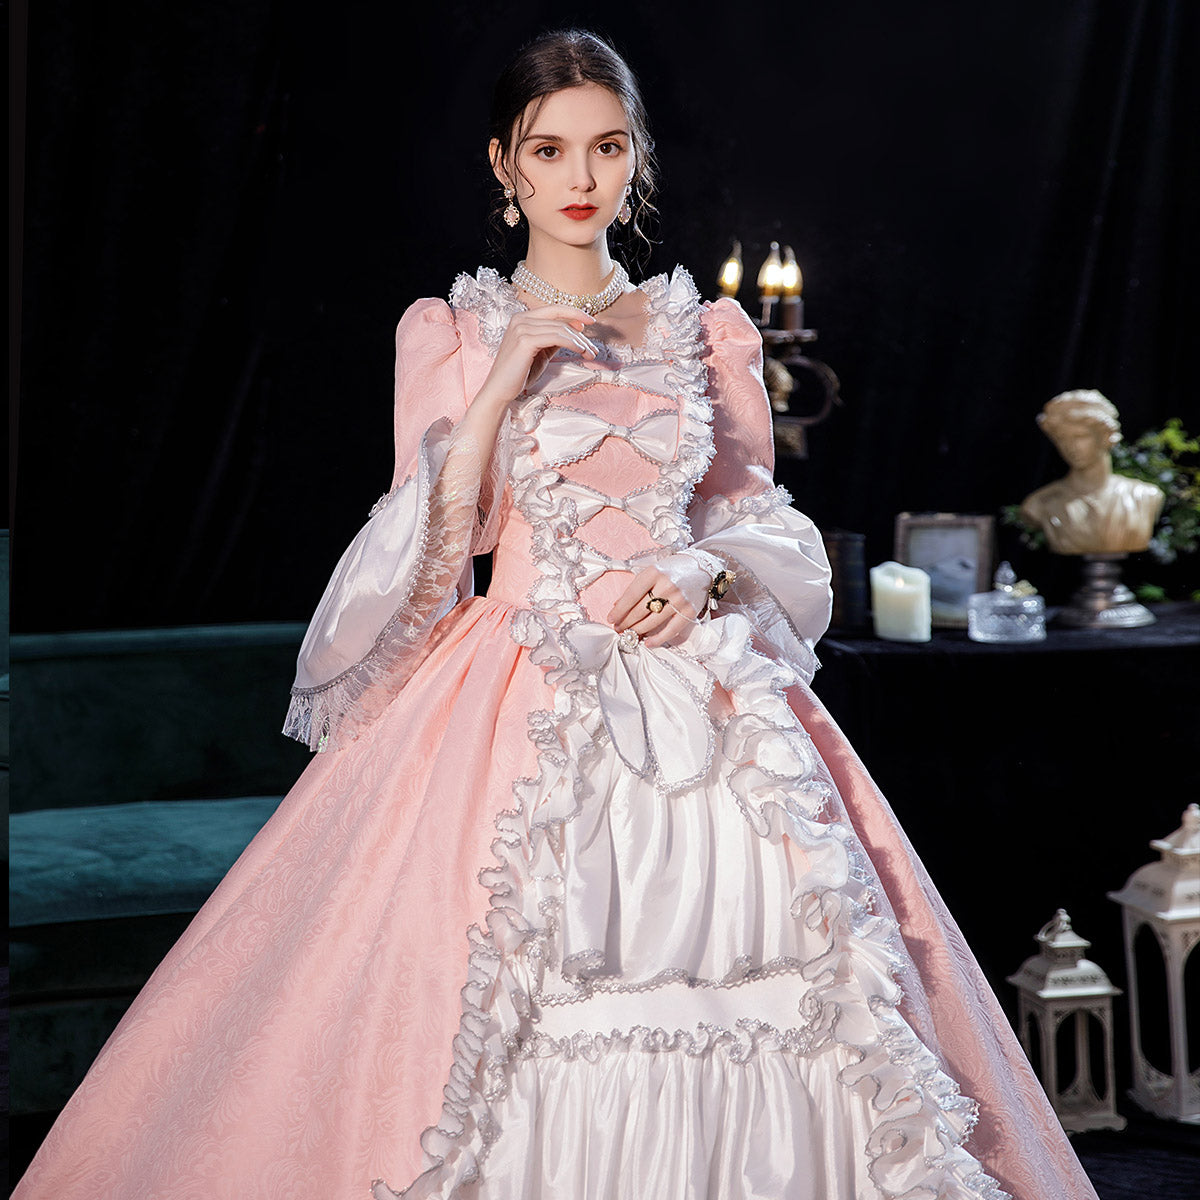 Pink Rococo Victorian Marie Antoinette Dress Gown